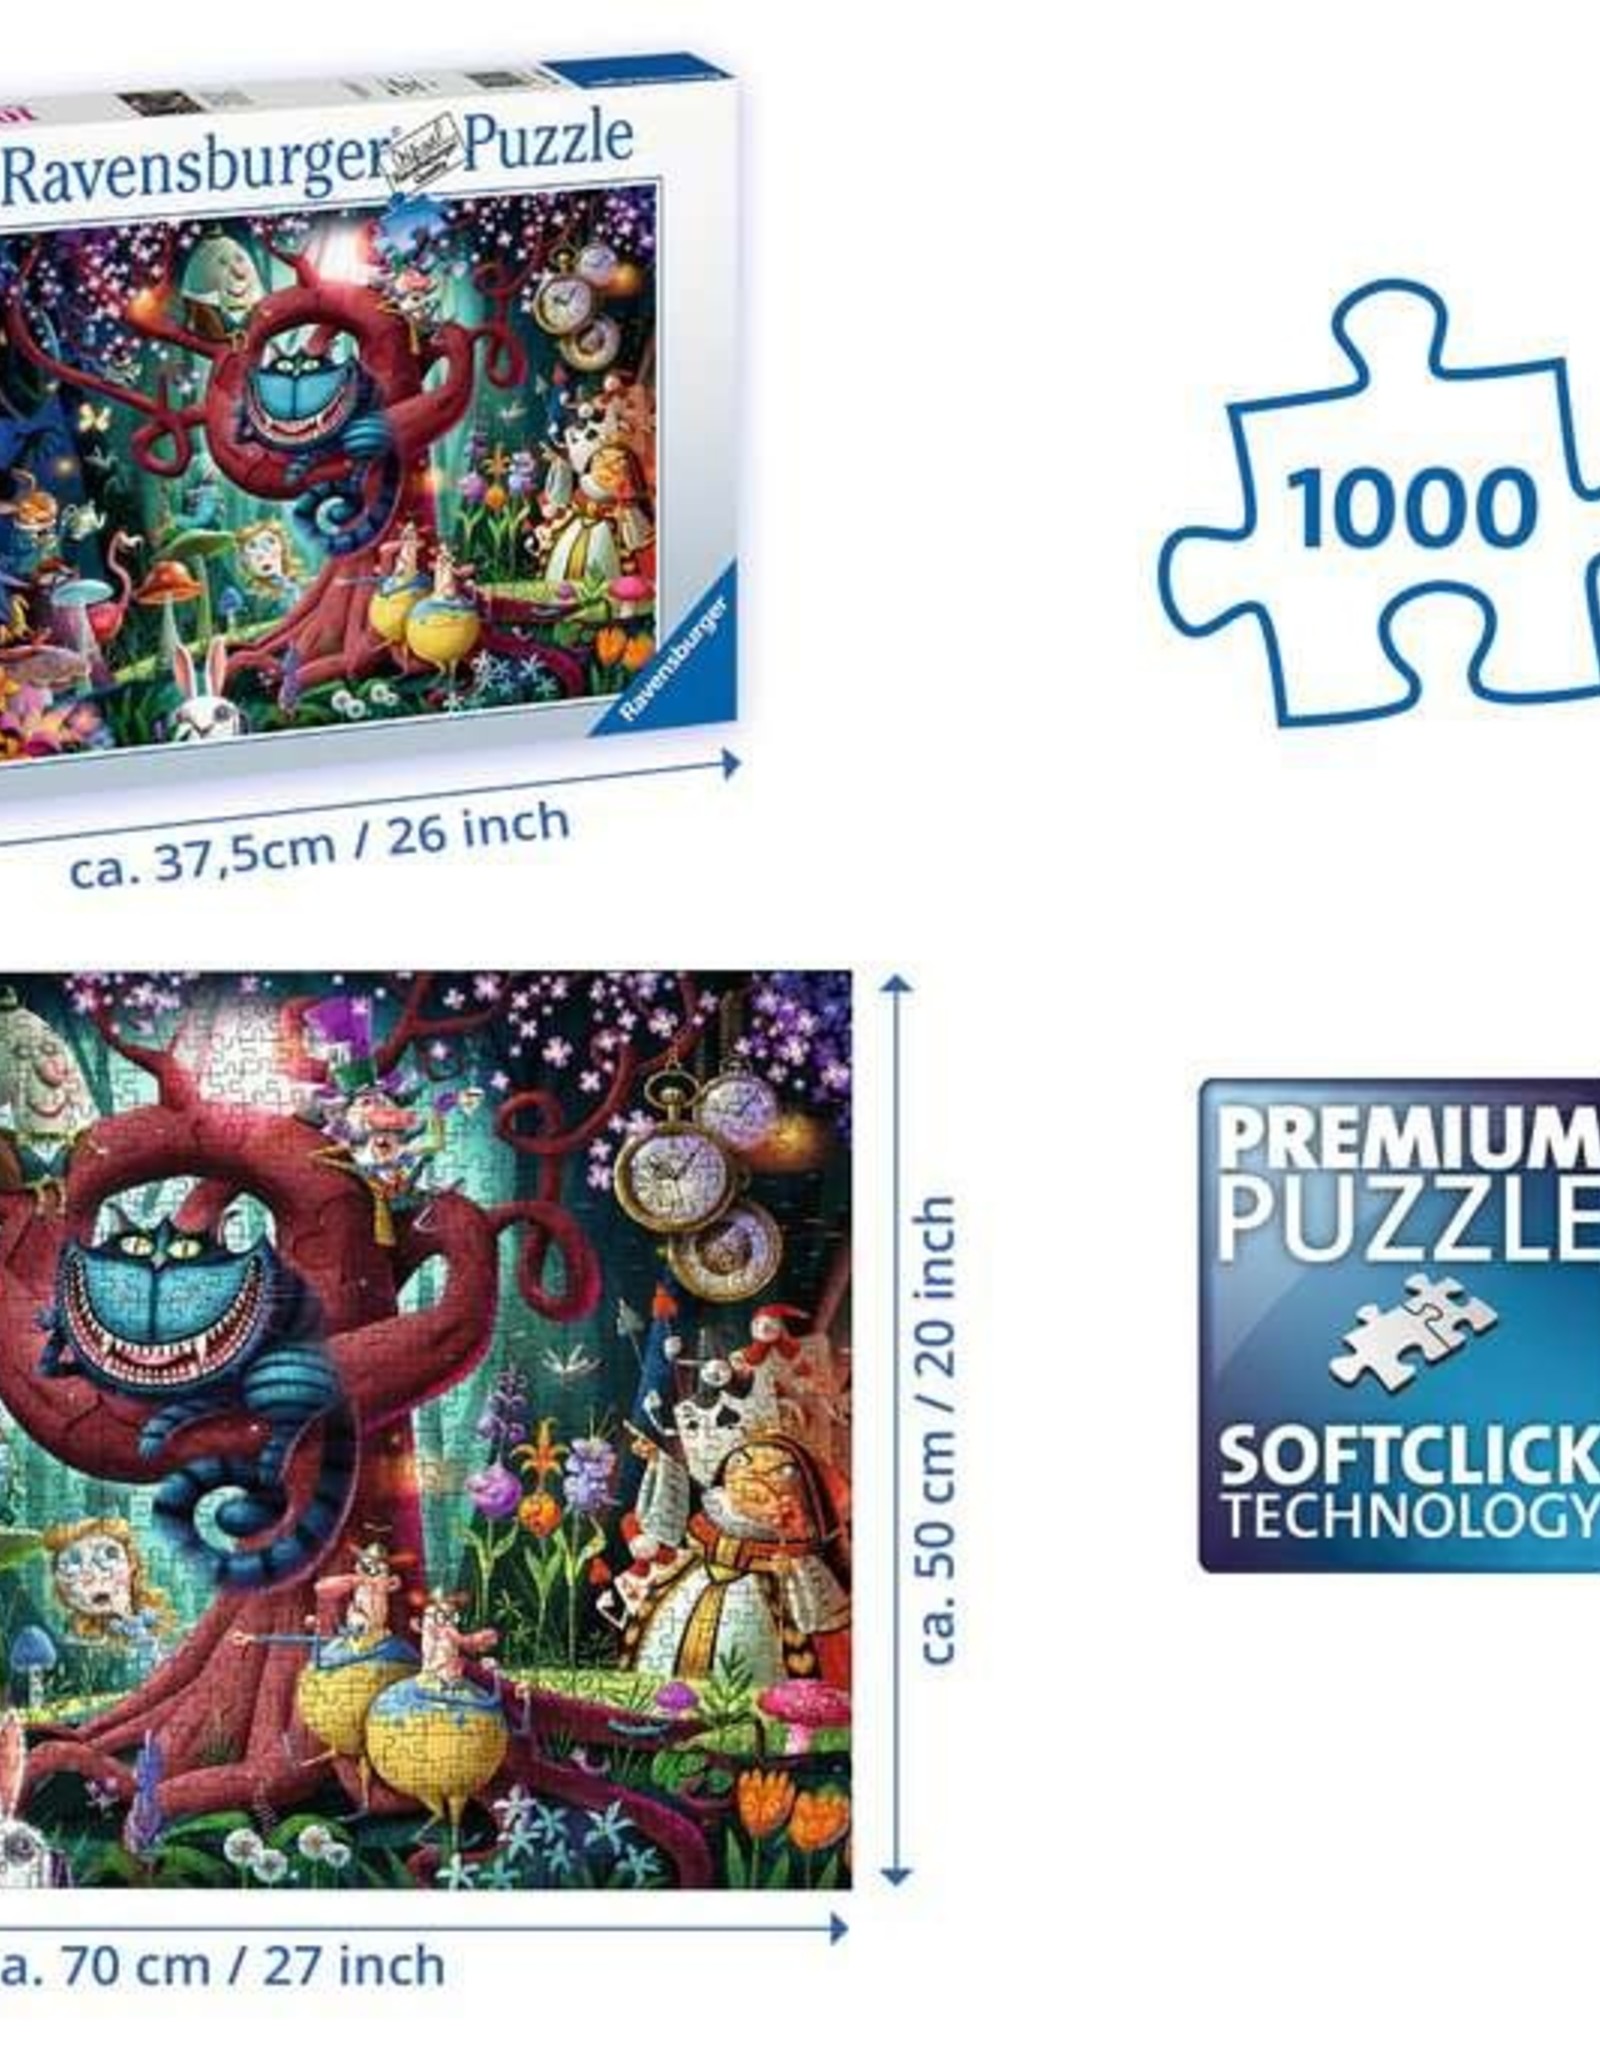 Ravensburger Puzzle 1000pc: Most Everyone is mad